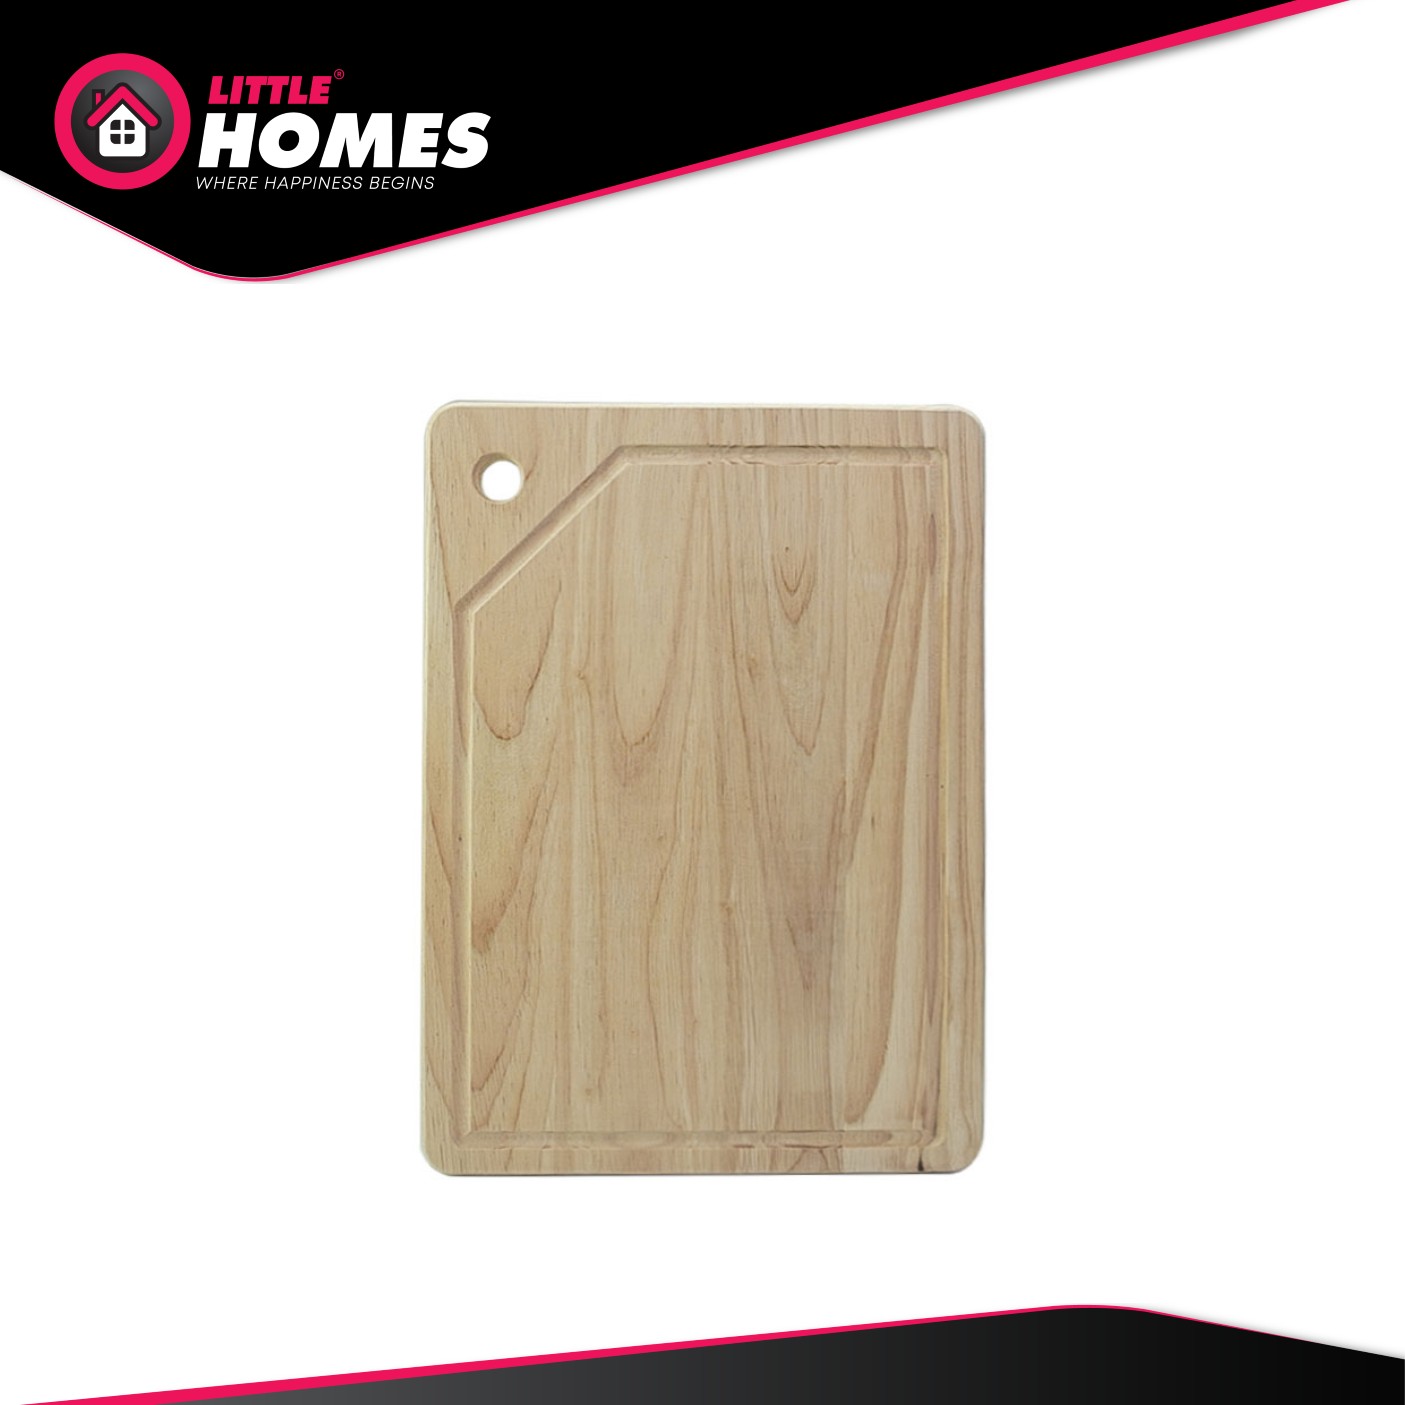 Little Homes Wooden Chopping Board Square 35cm x 25cm Cutting Board